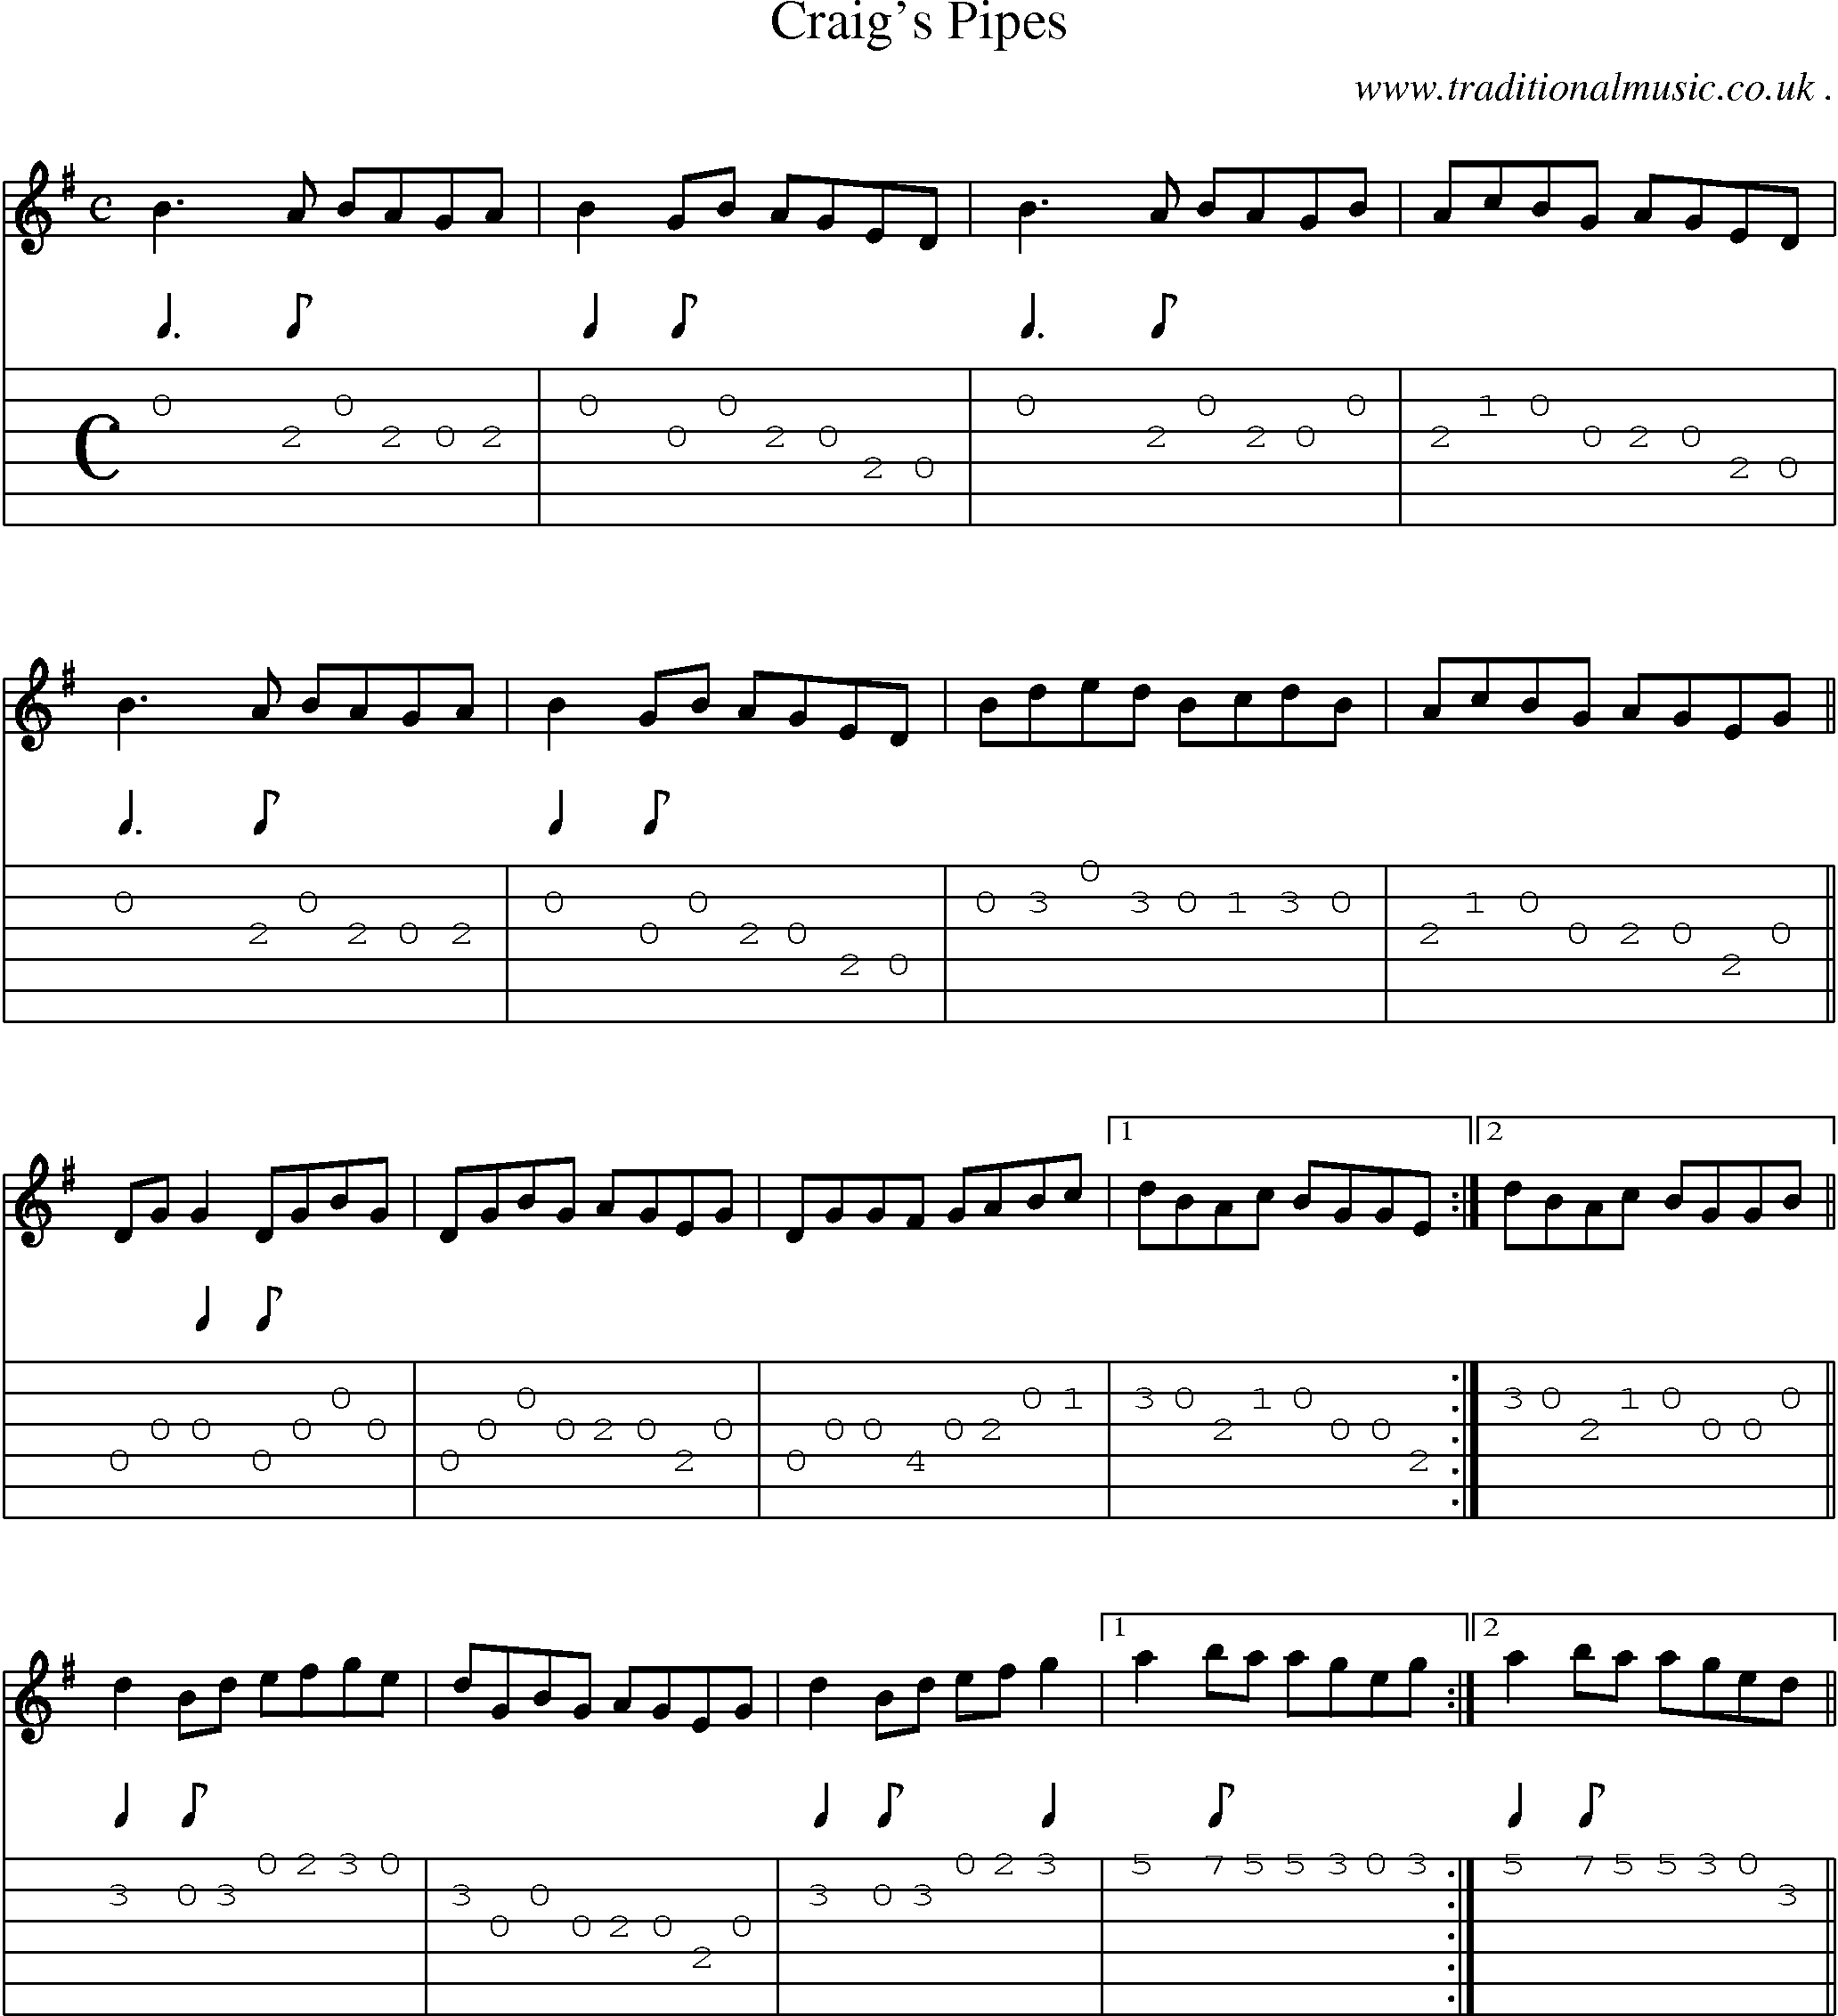 Sheet-Music and Guitar Tabs for Craigs Pipes